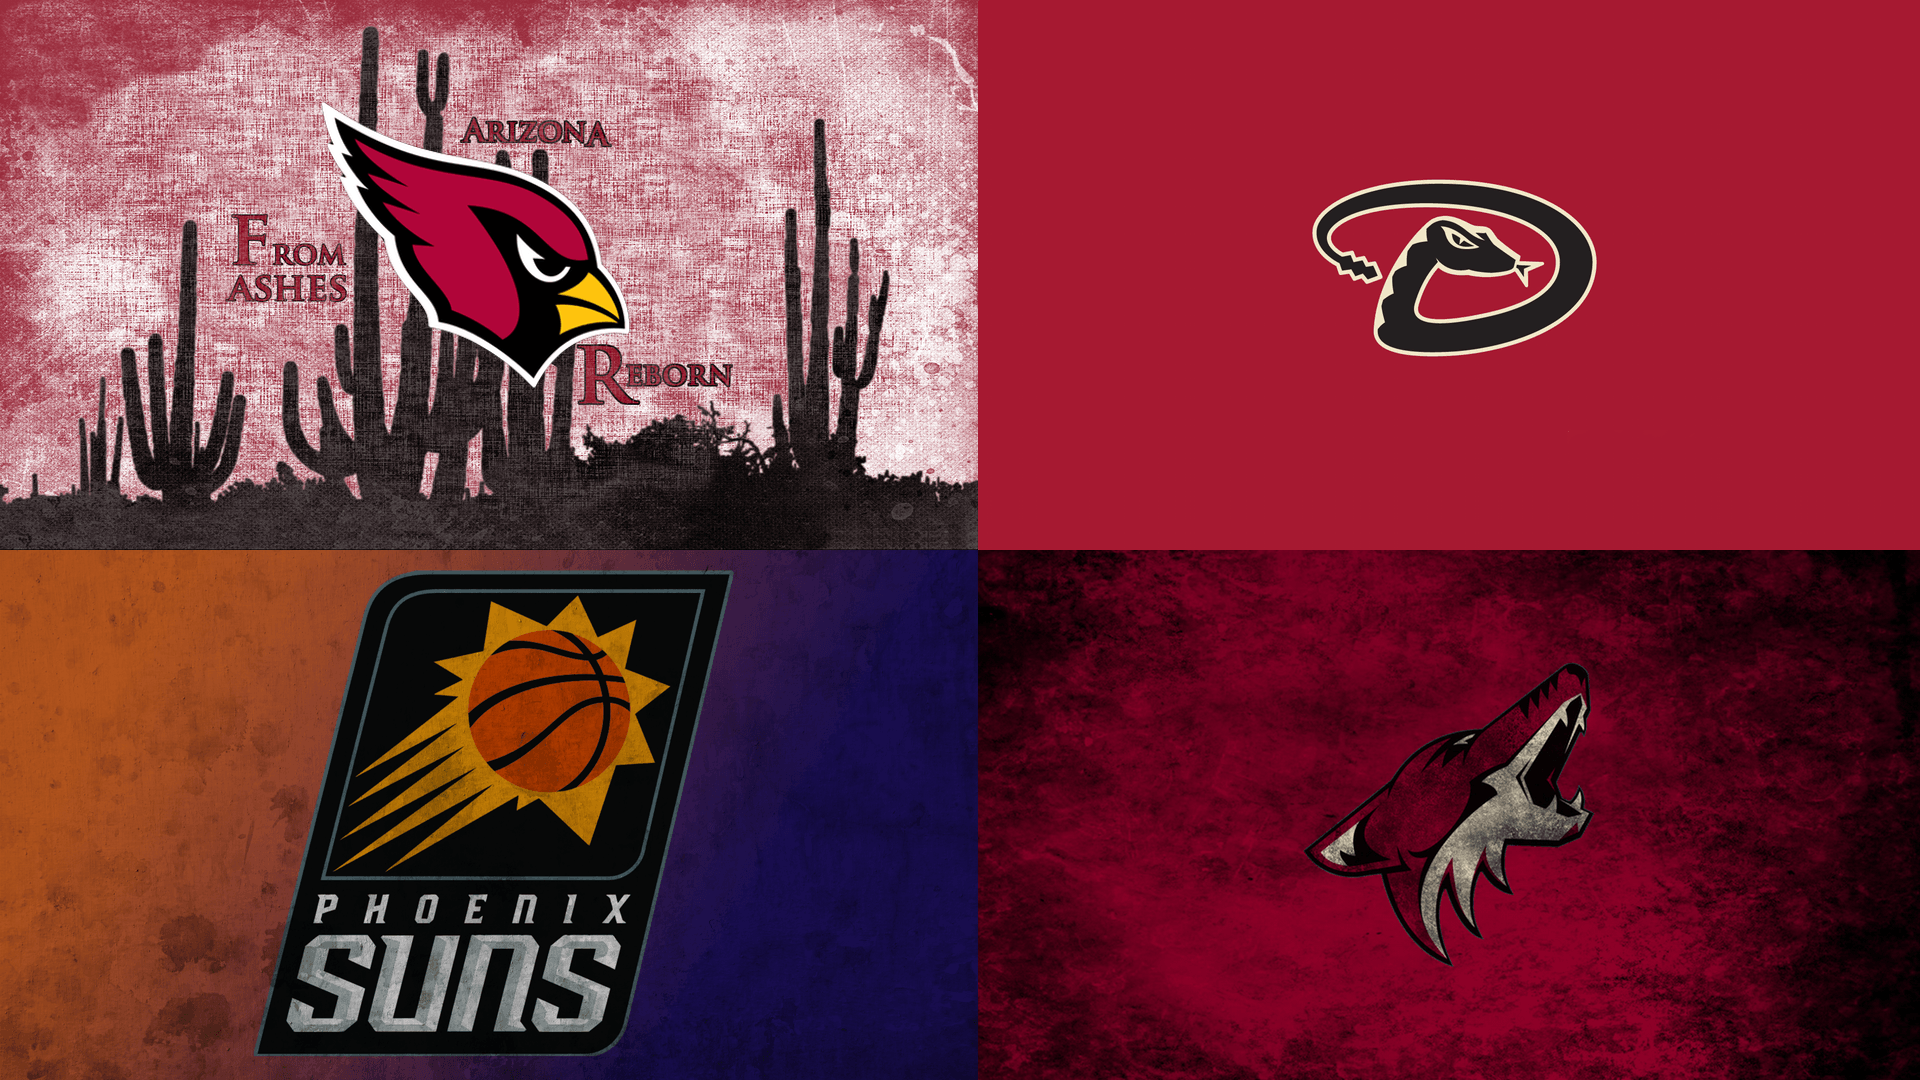 I wanted a background for my laptop with the 4 major AZ Sports